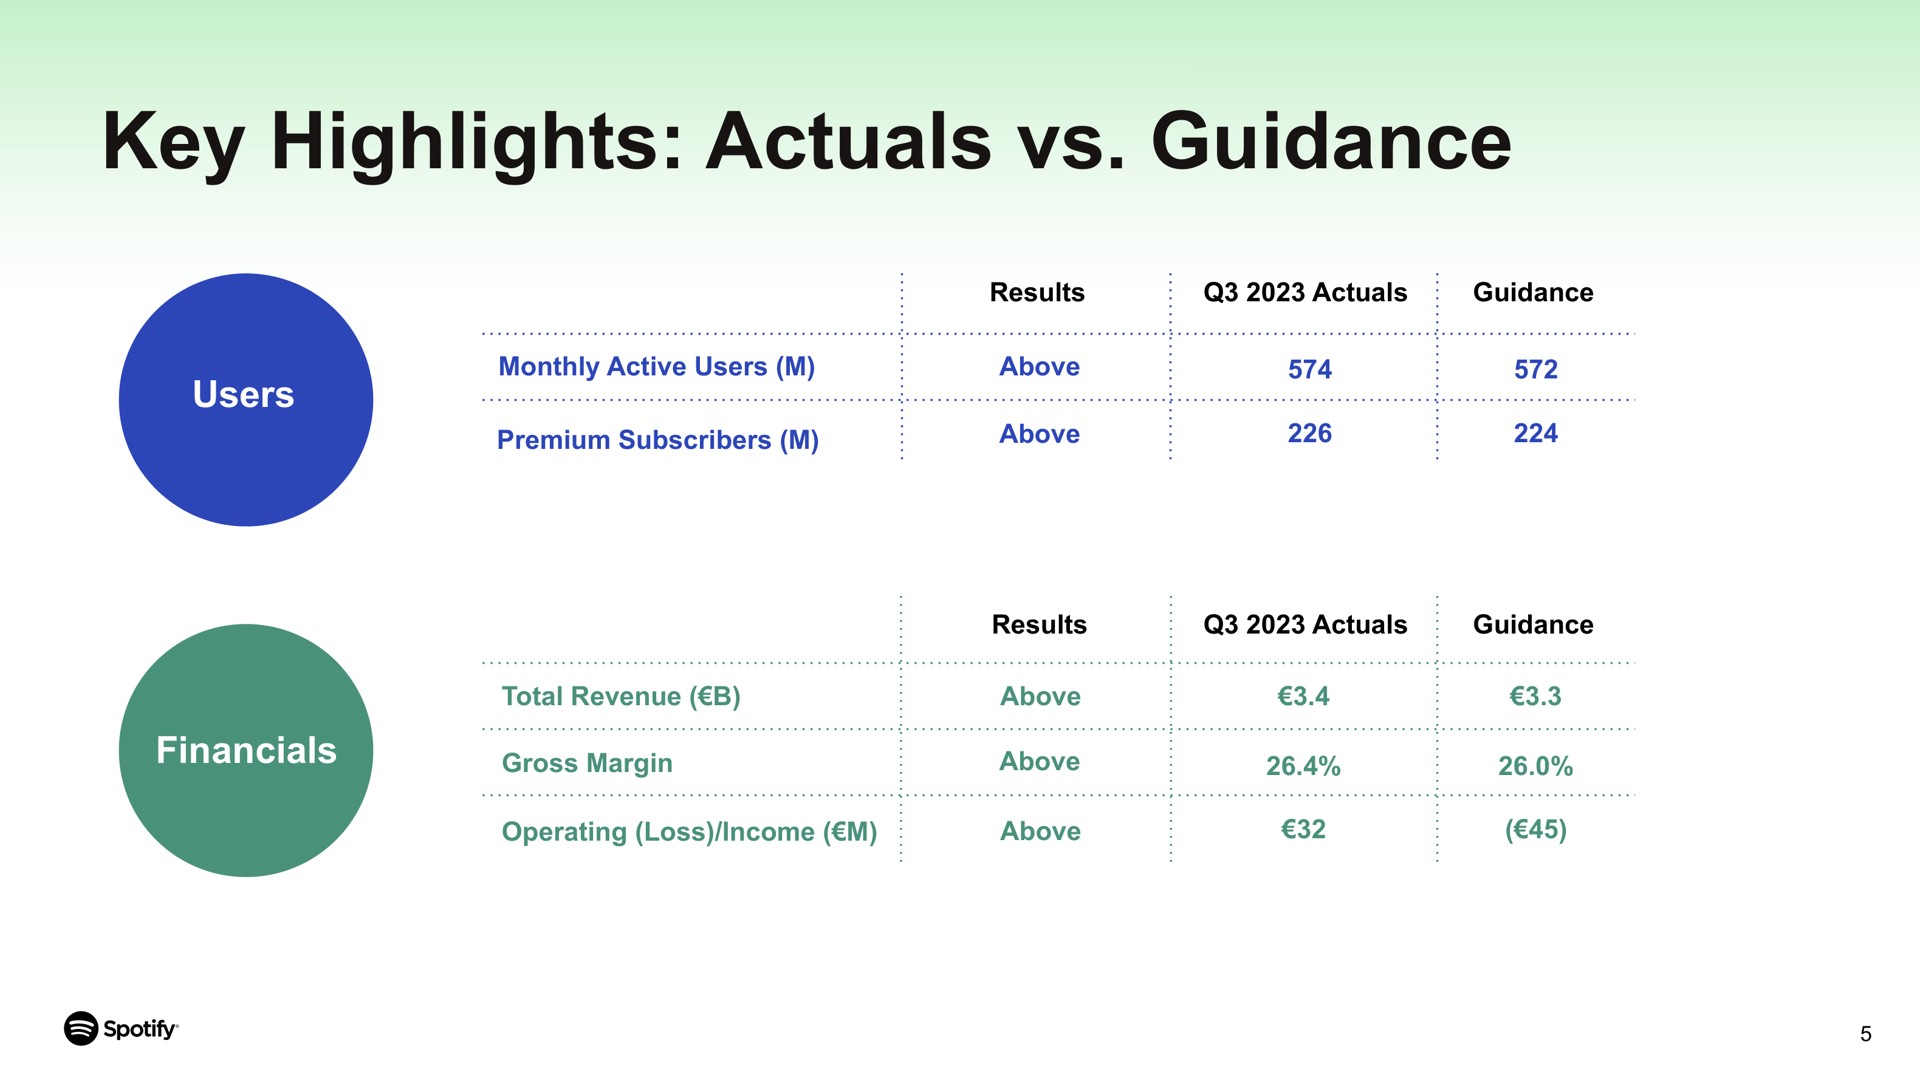 key highlights guidance users monthly active i a serene results i above a seer hoes epee a ocean a neo on ose a rea coe | Spotify